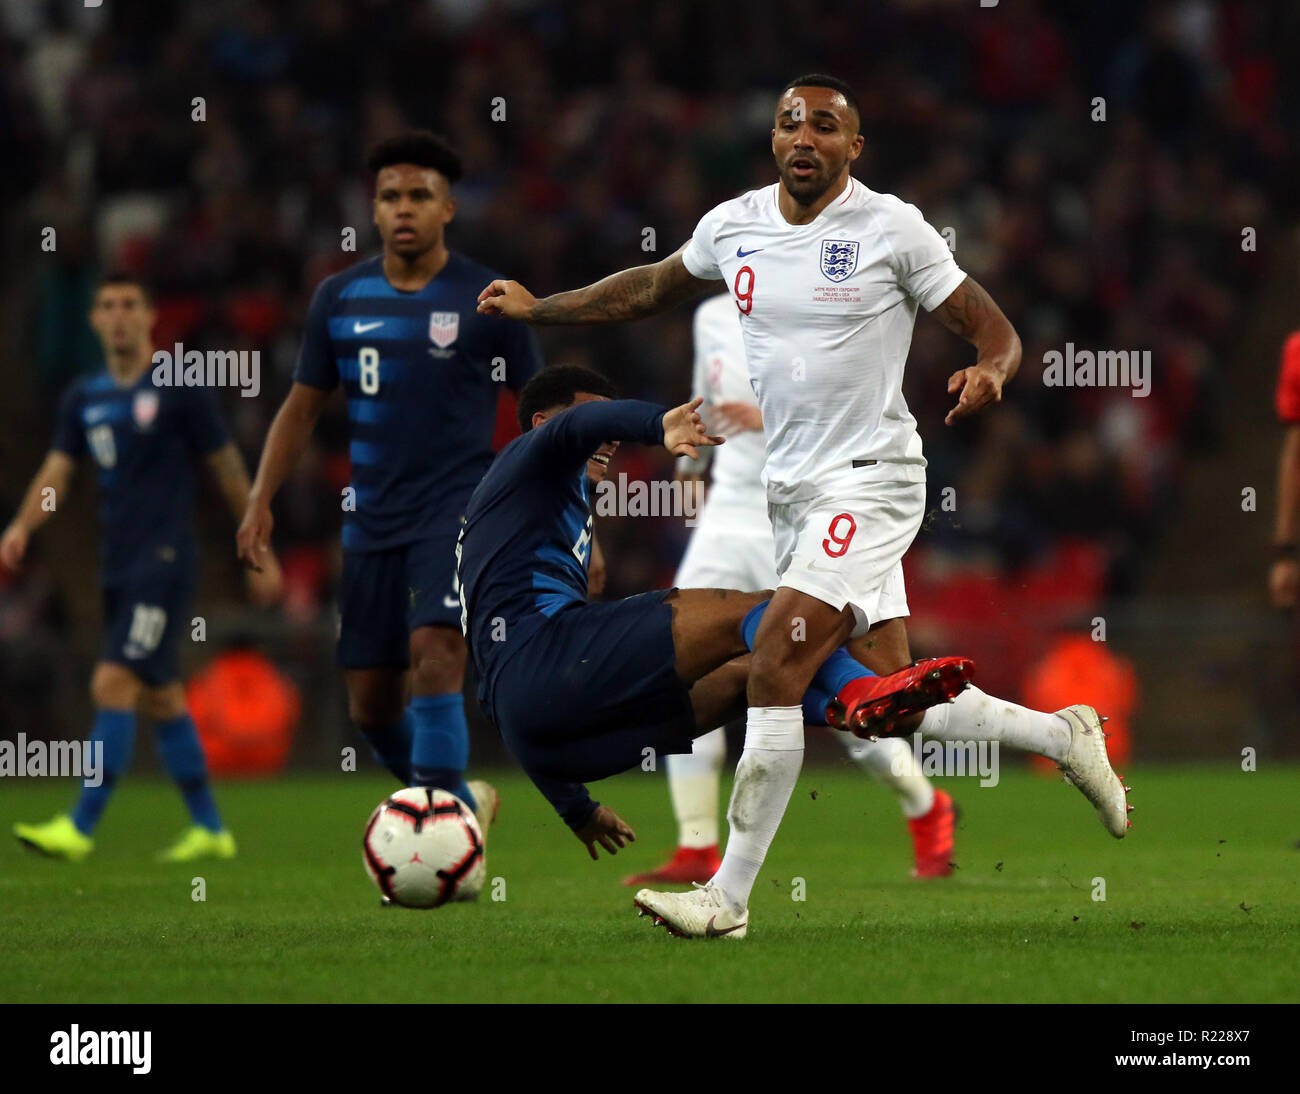 London, UK. 15th November, 2018. DeAndre Yedlin (USA) Callum Wilson (E) at the England v USA game (Wayne Rooney's last England game) at Wembley Stadium, London, November 15, 2018. **This picture is for editorial use ONLY** Credit: Paul Marriott/Alamy Live News Stock Photo